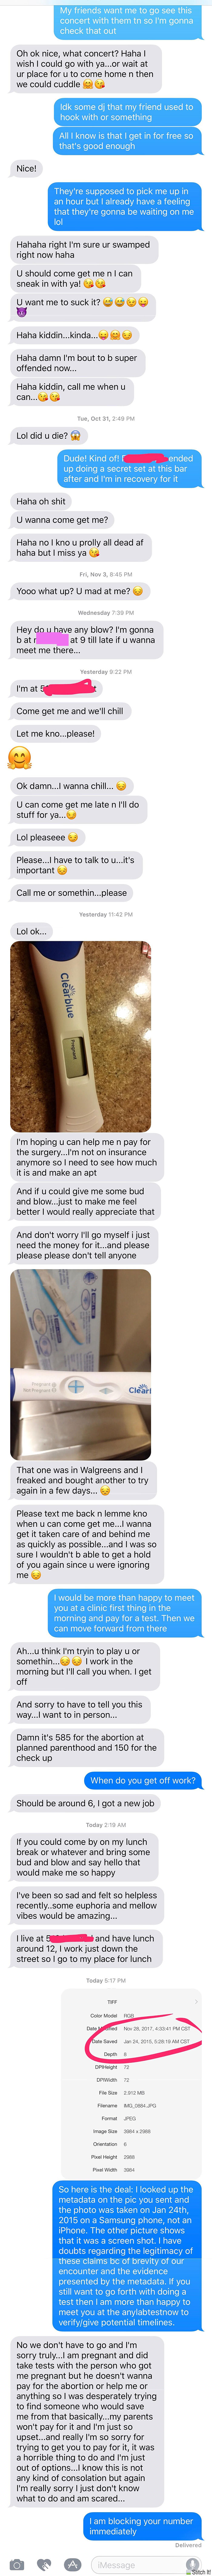 Girl I Hooked Up With Tries Desperately To Get Me To Hang Out And Eventually Fakes A Pregnancy In An Attempt To Hustle Me For Drugs/Money